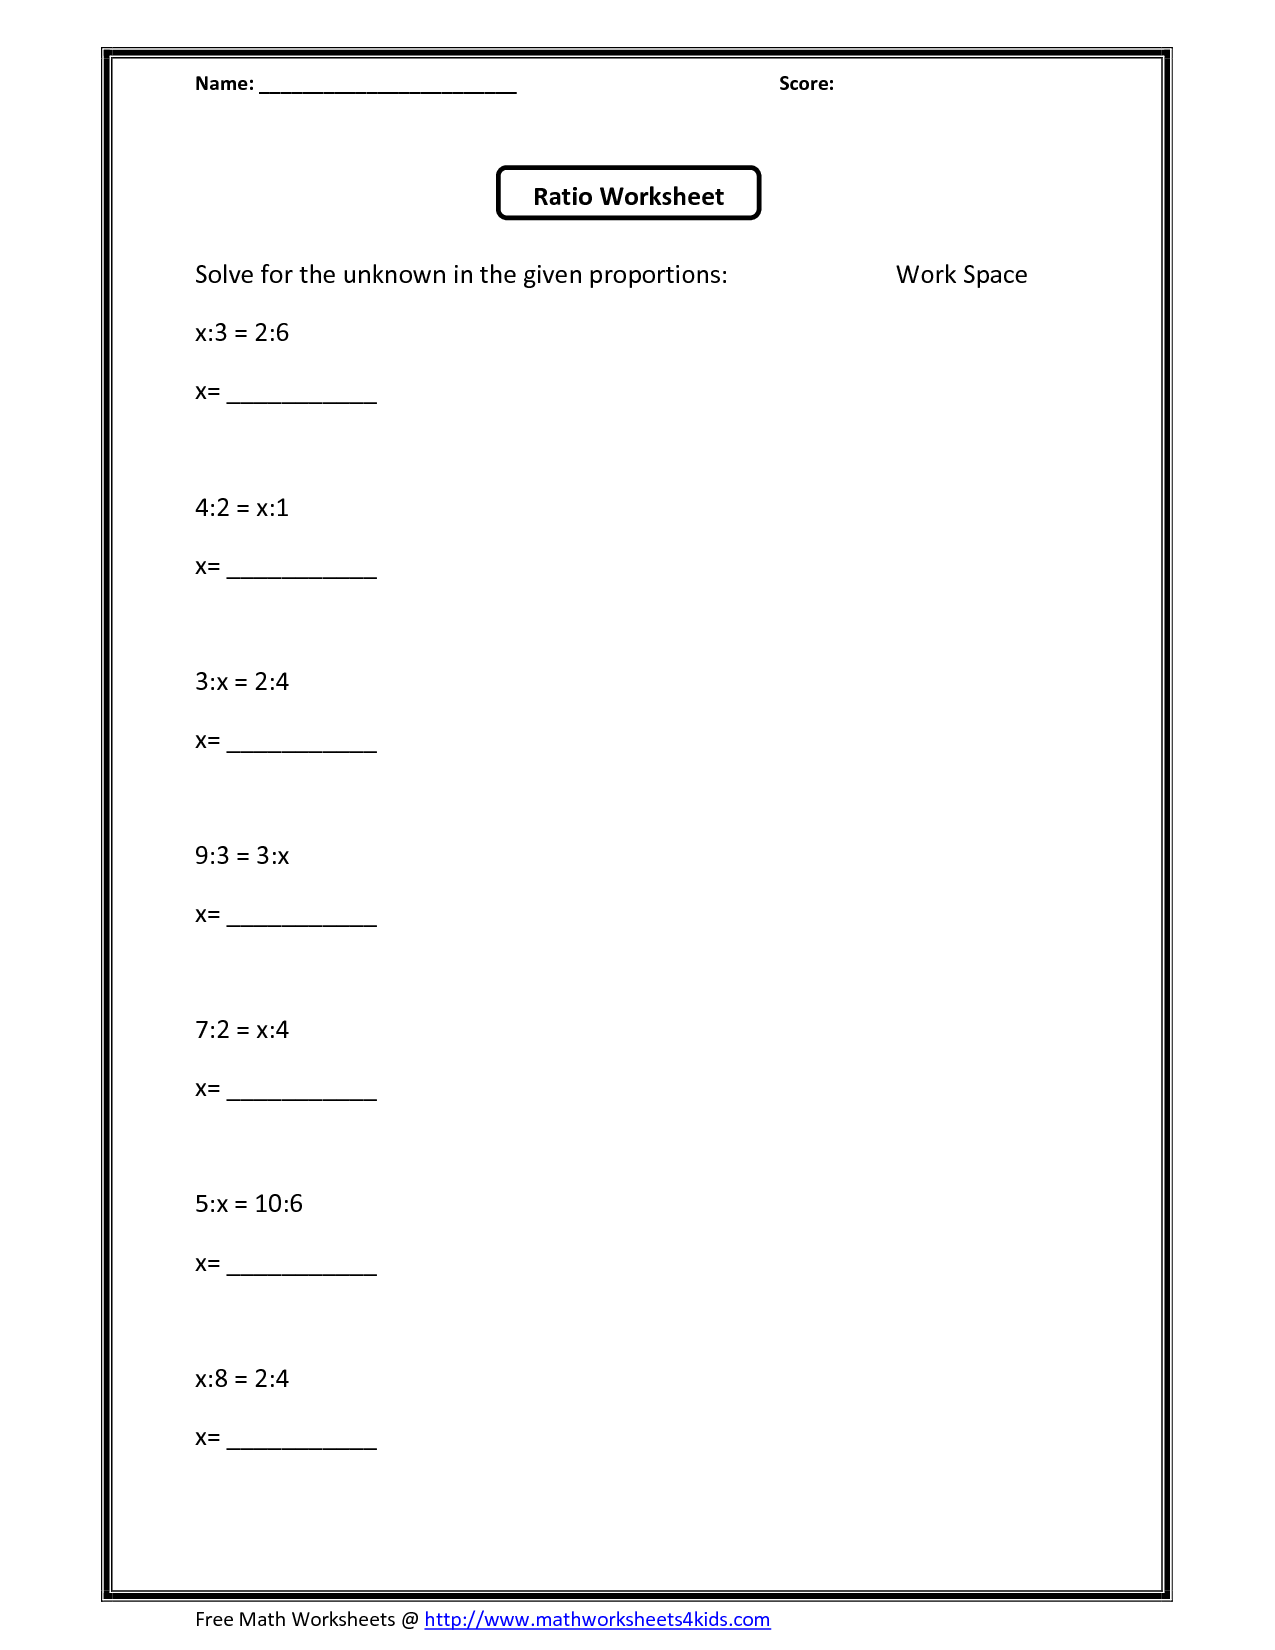 6 Best Images of Ratio And Proportion Worksheets - Equivalent Ratios